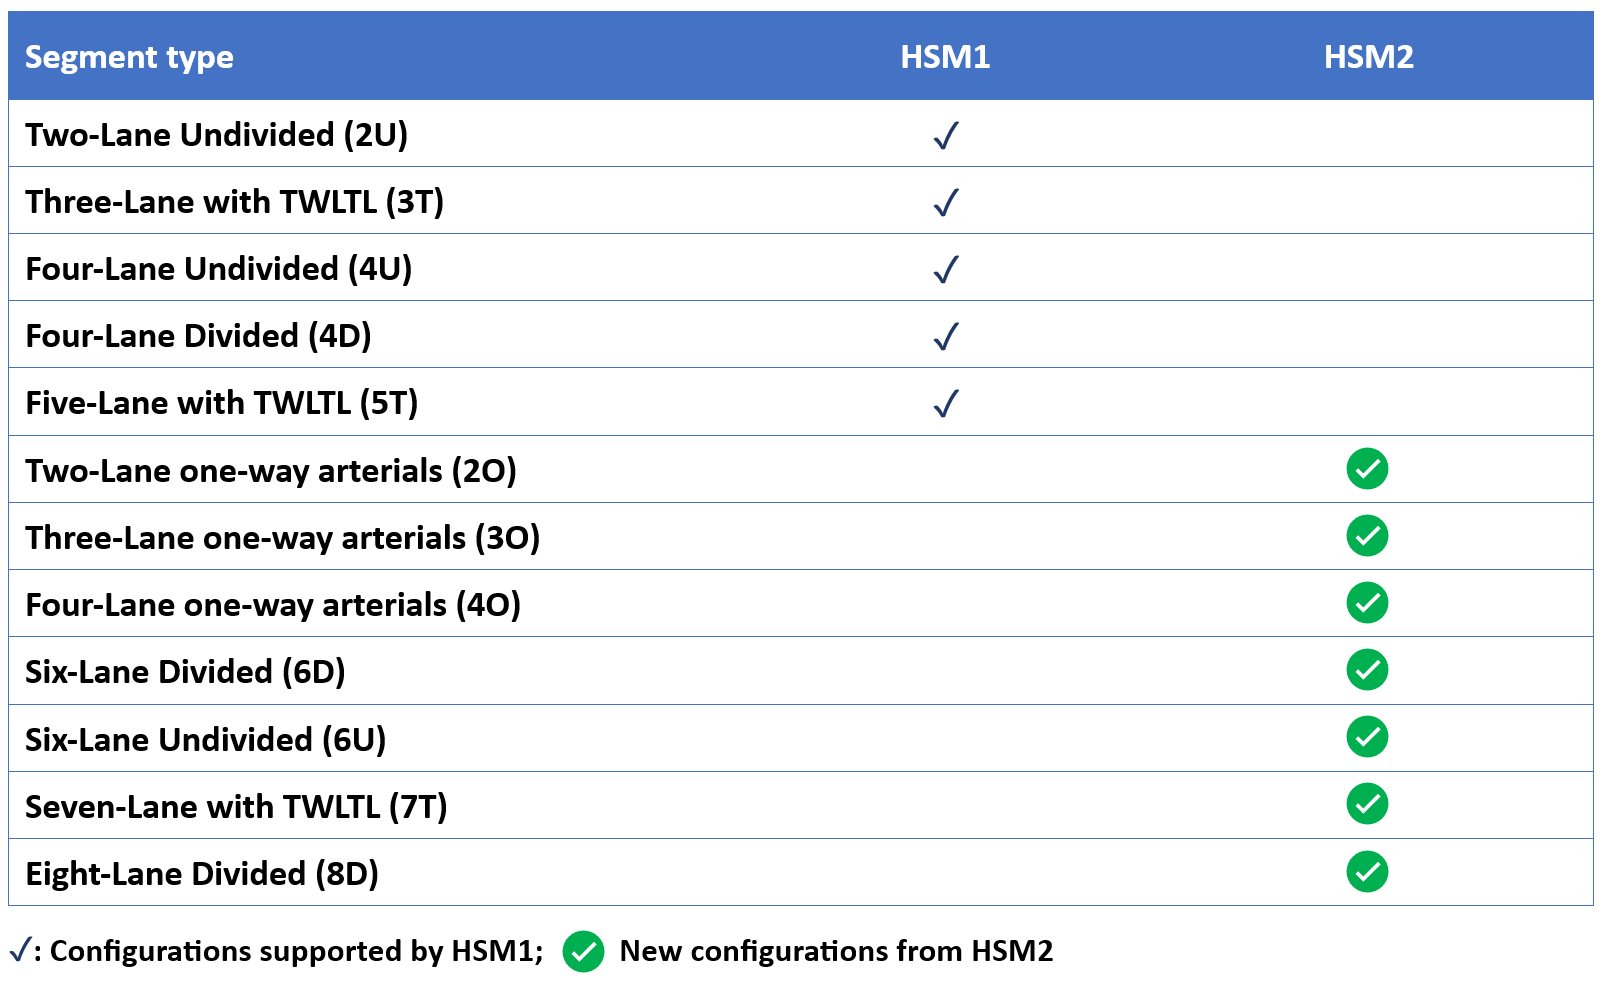 Urban and suburban segments supported by HSS 2024. Compares HSM1 and HSM2